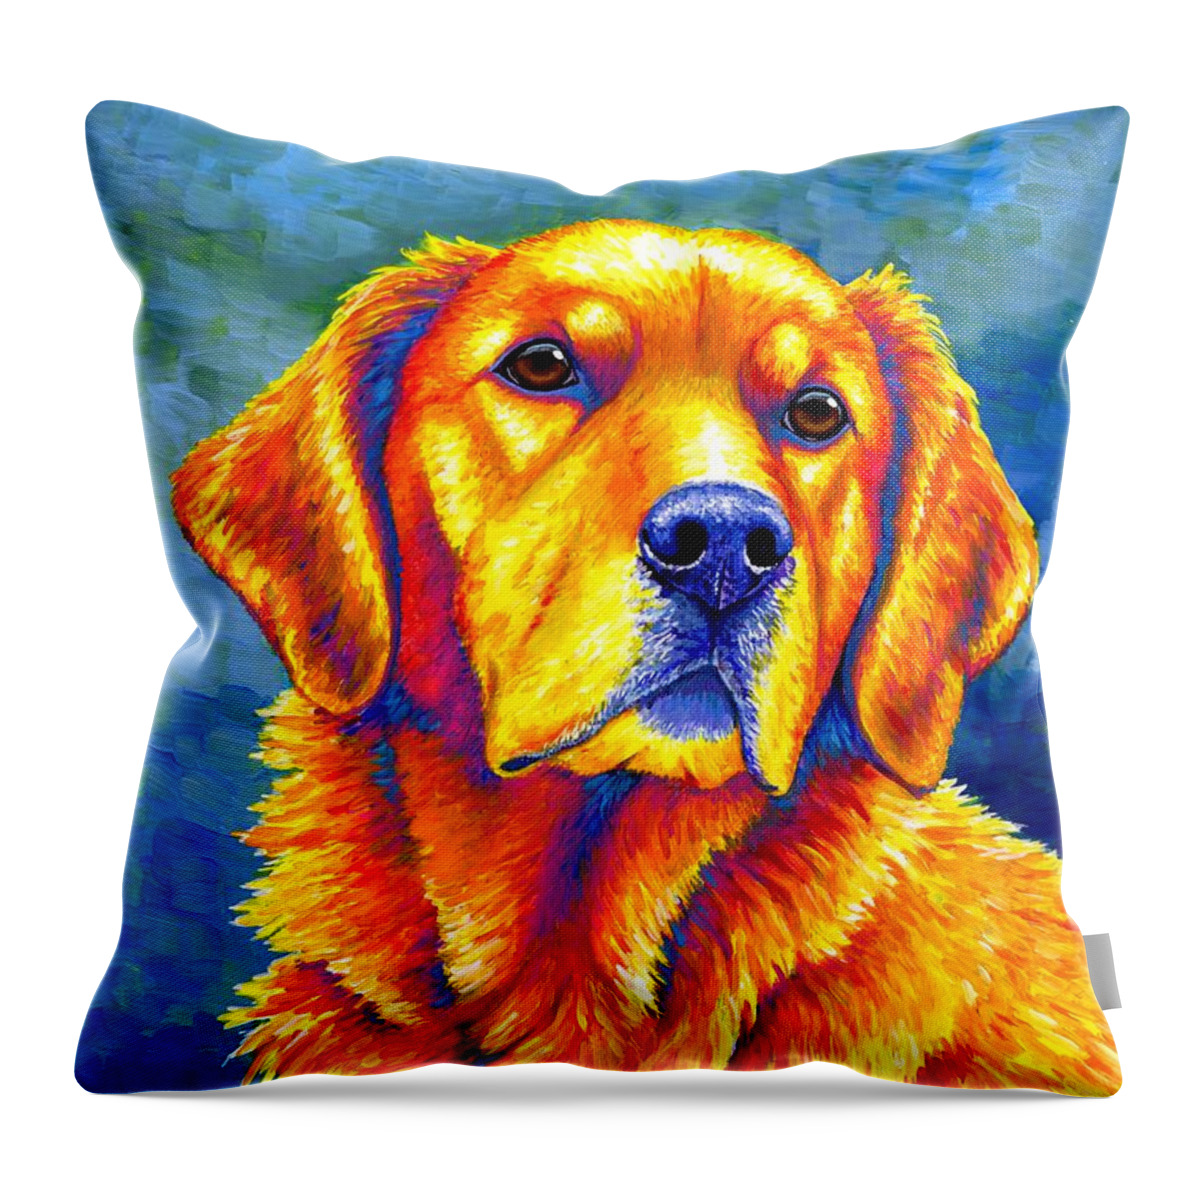 Golden Retriever Throw Pillow featuring the painting Faithful Friend - Colorful Golden Retriever Dog by Rebecca Wang